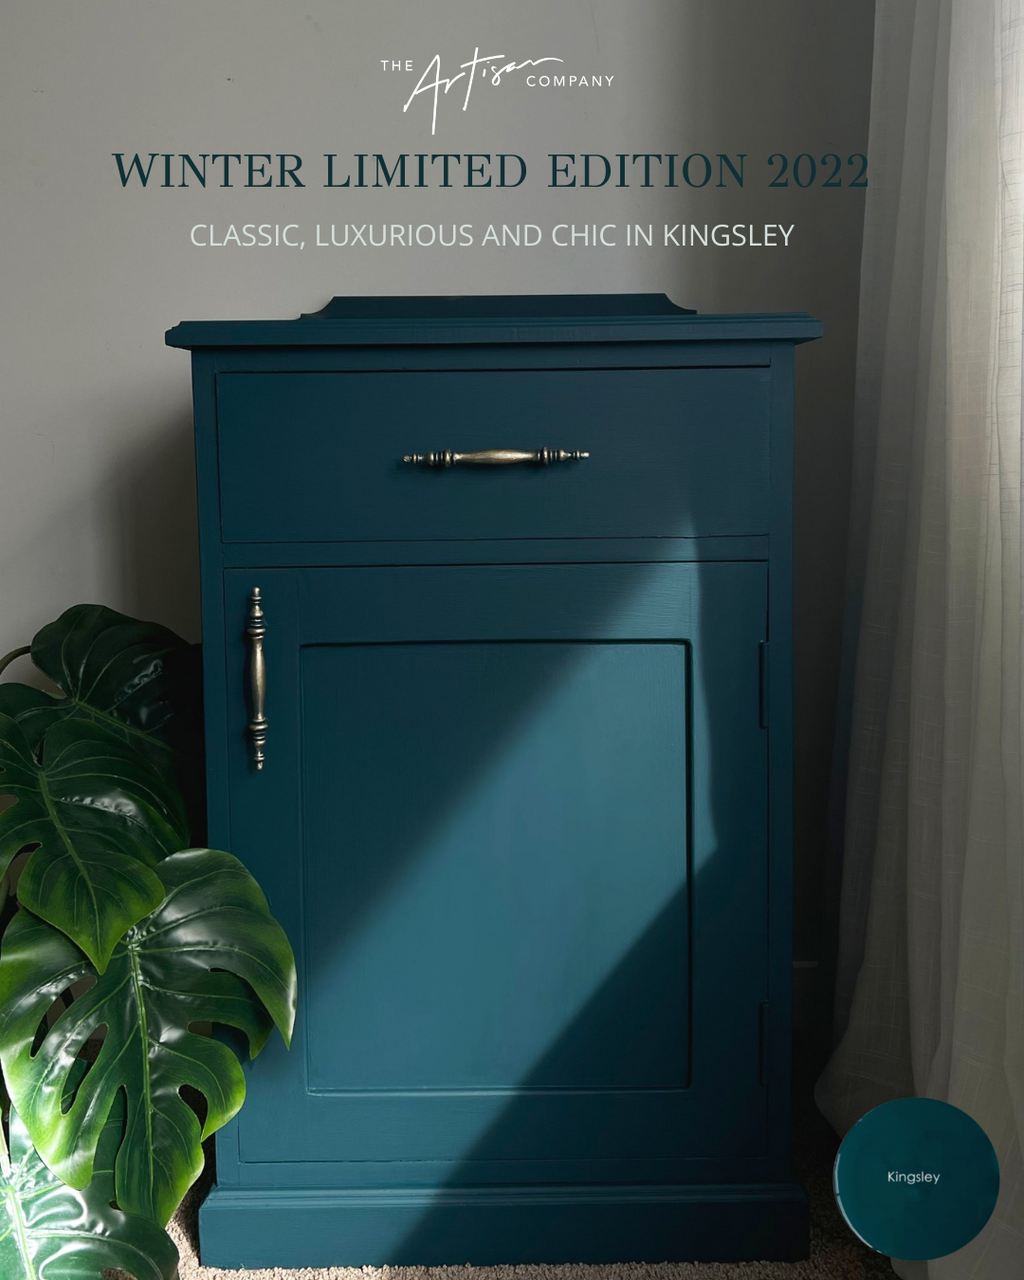 Previous Limited Edition Winter 2022 - Kingsley - Velvet Luxe - Special Order